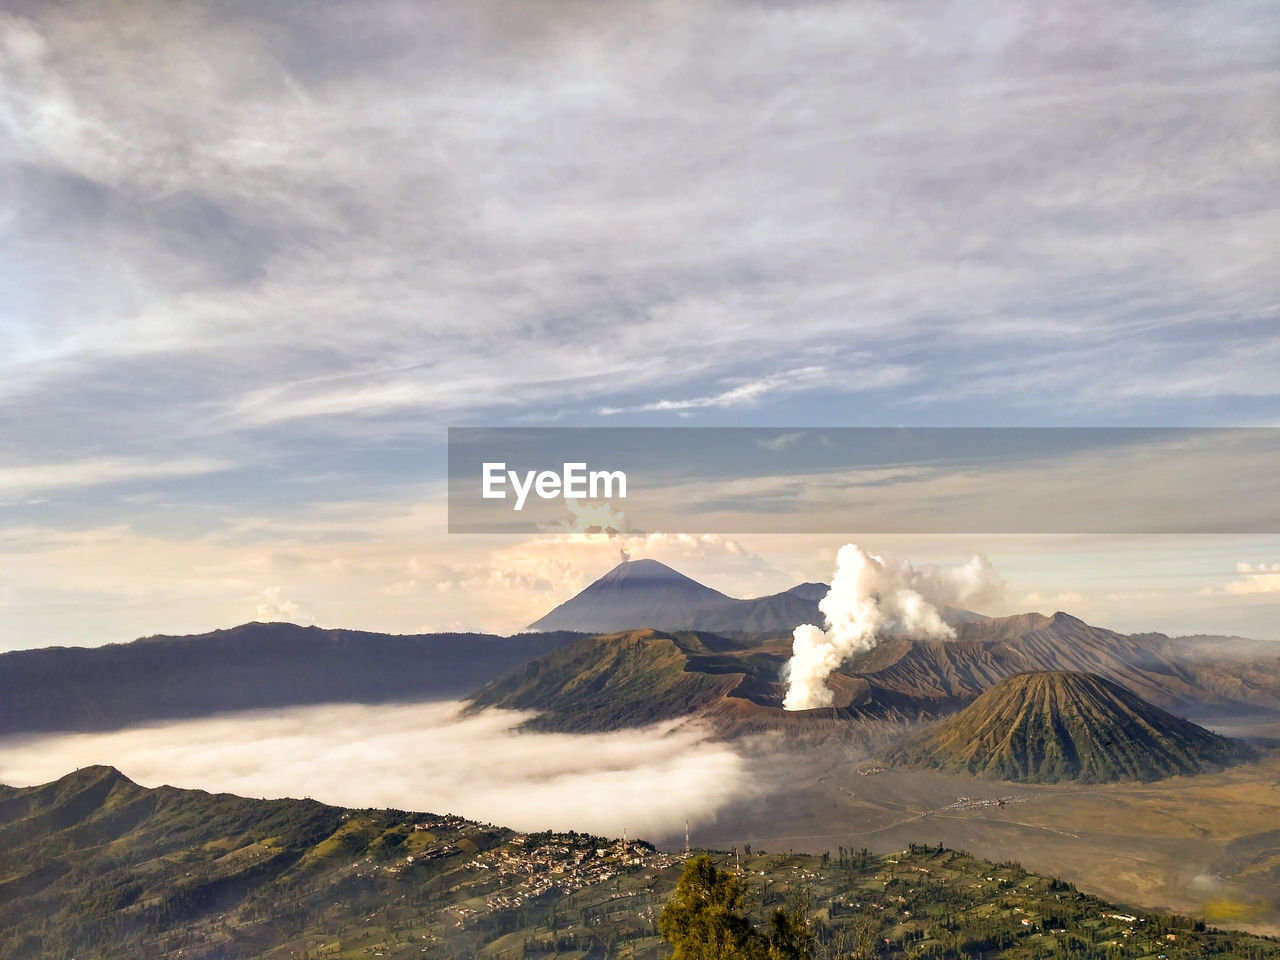 VIEW OF VOLCANIC LANDSCAPE